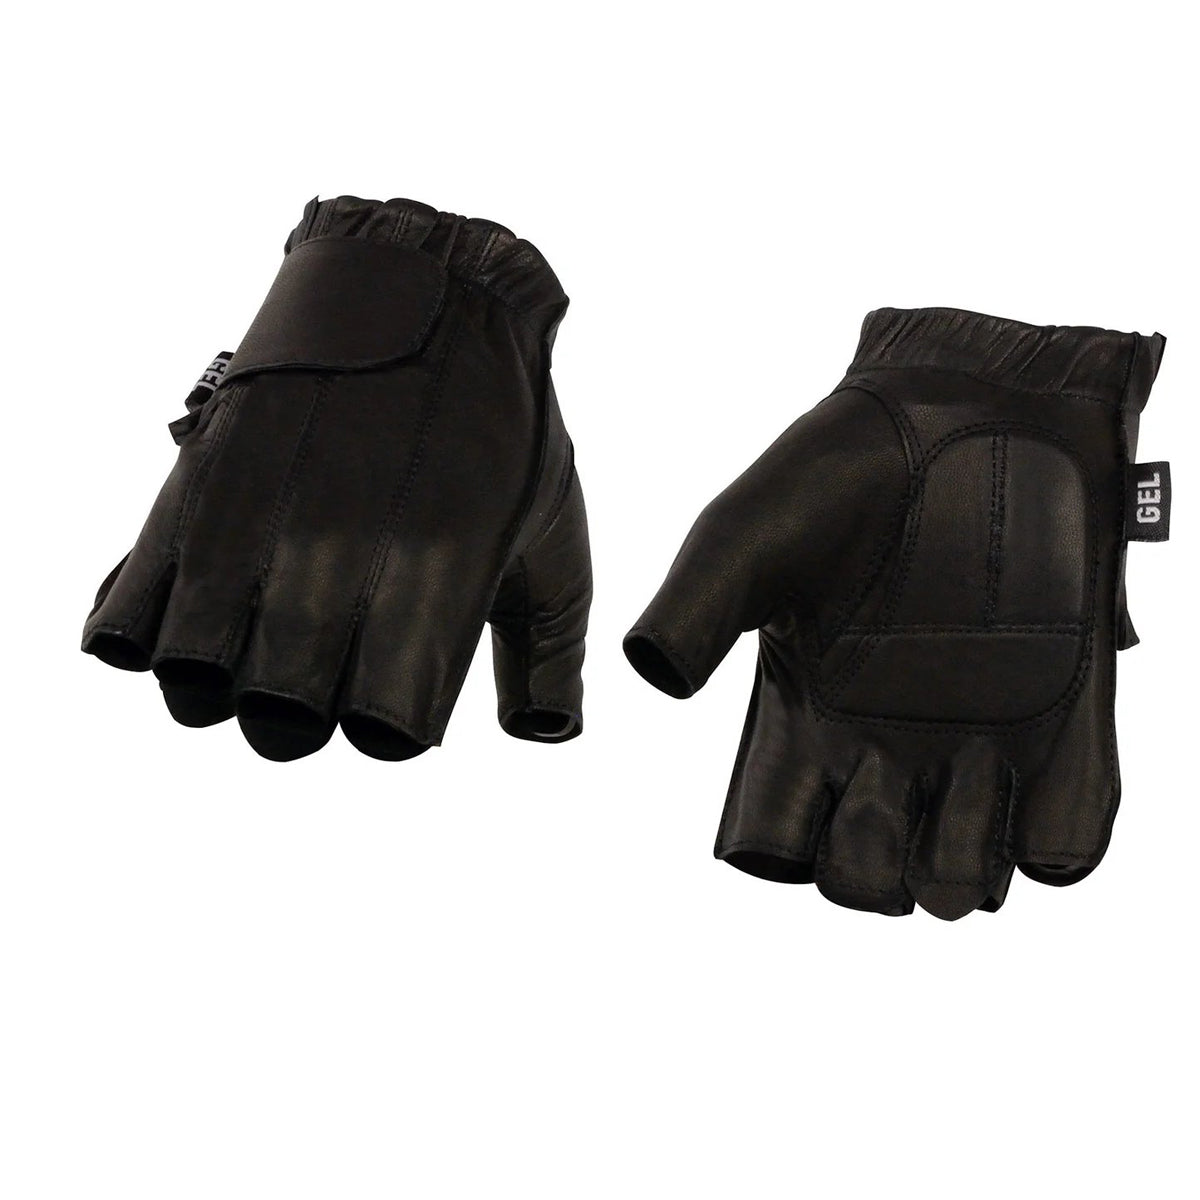 Men's Black Leather Gel Padded Palm Fingerless Motorcycle Hand Gloves W/ Soft ‘Genuine Leather’